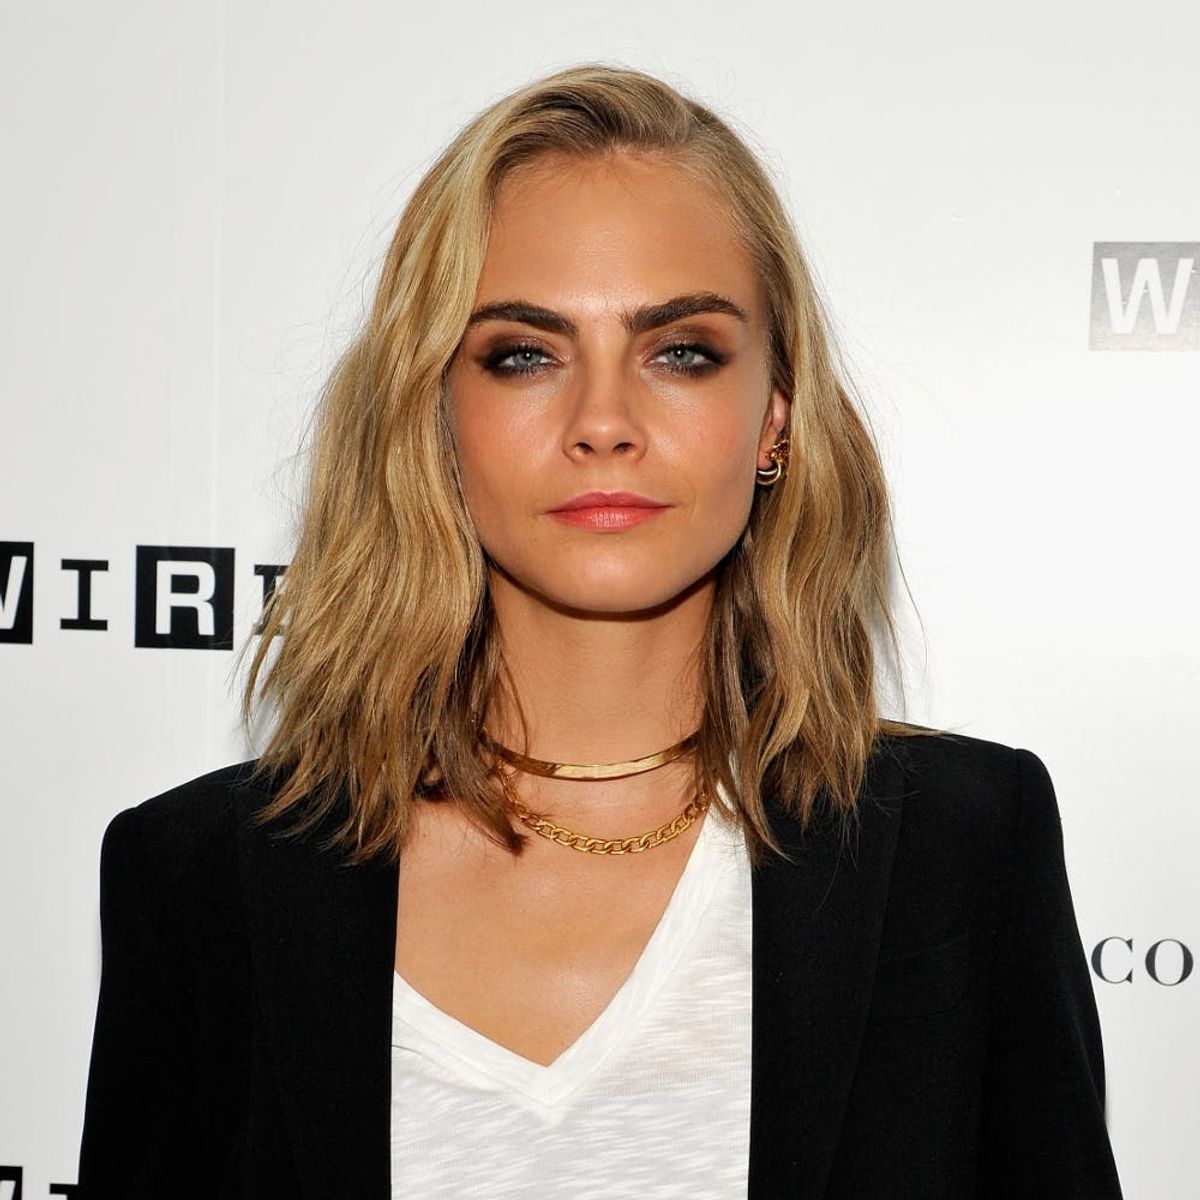 Eyebrow Extensions Are Here So You Can Get Cara Delevingne-Like Brows